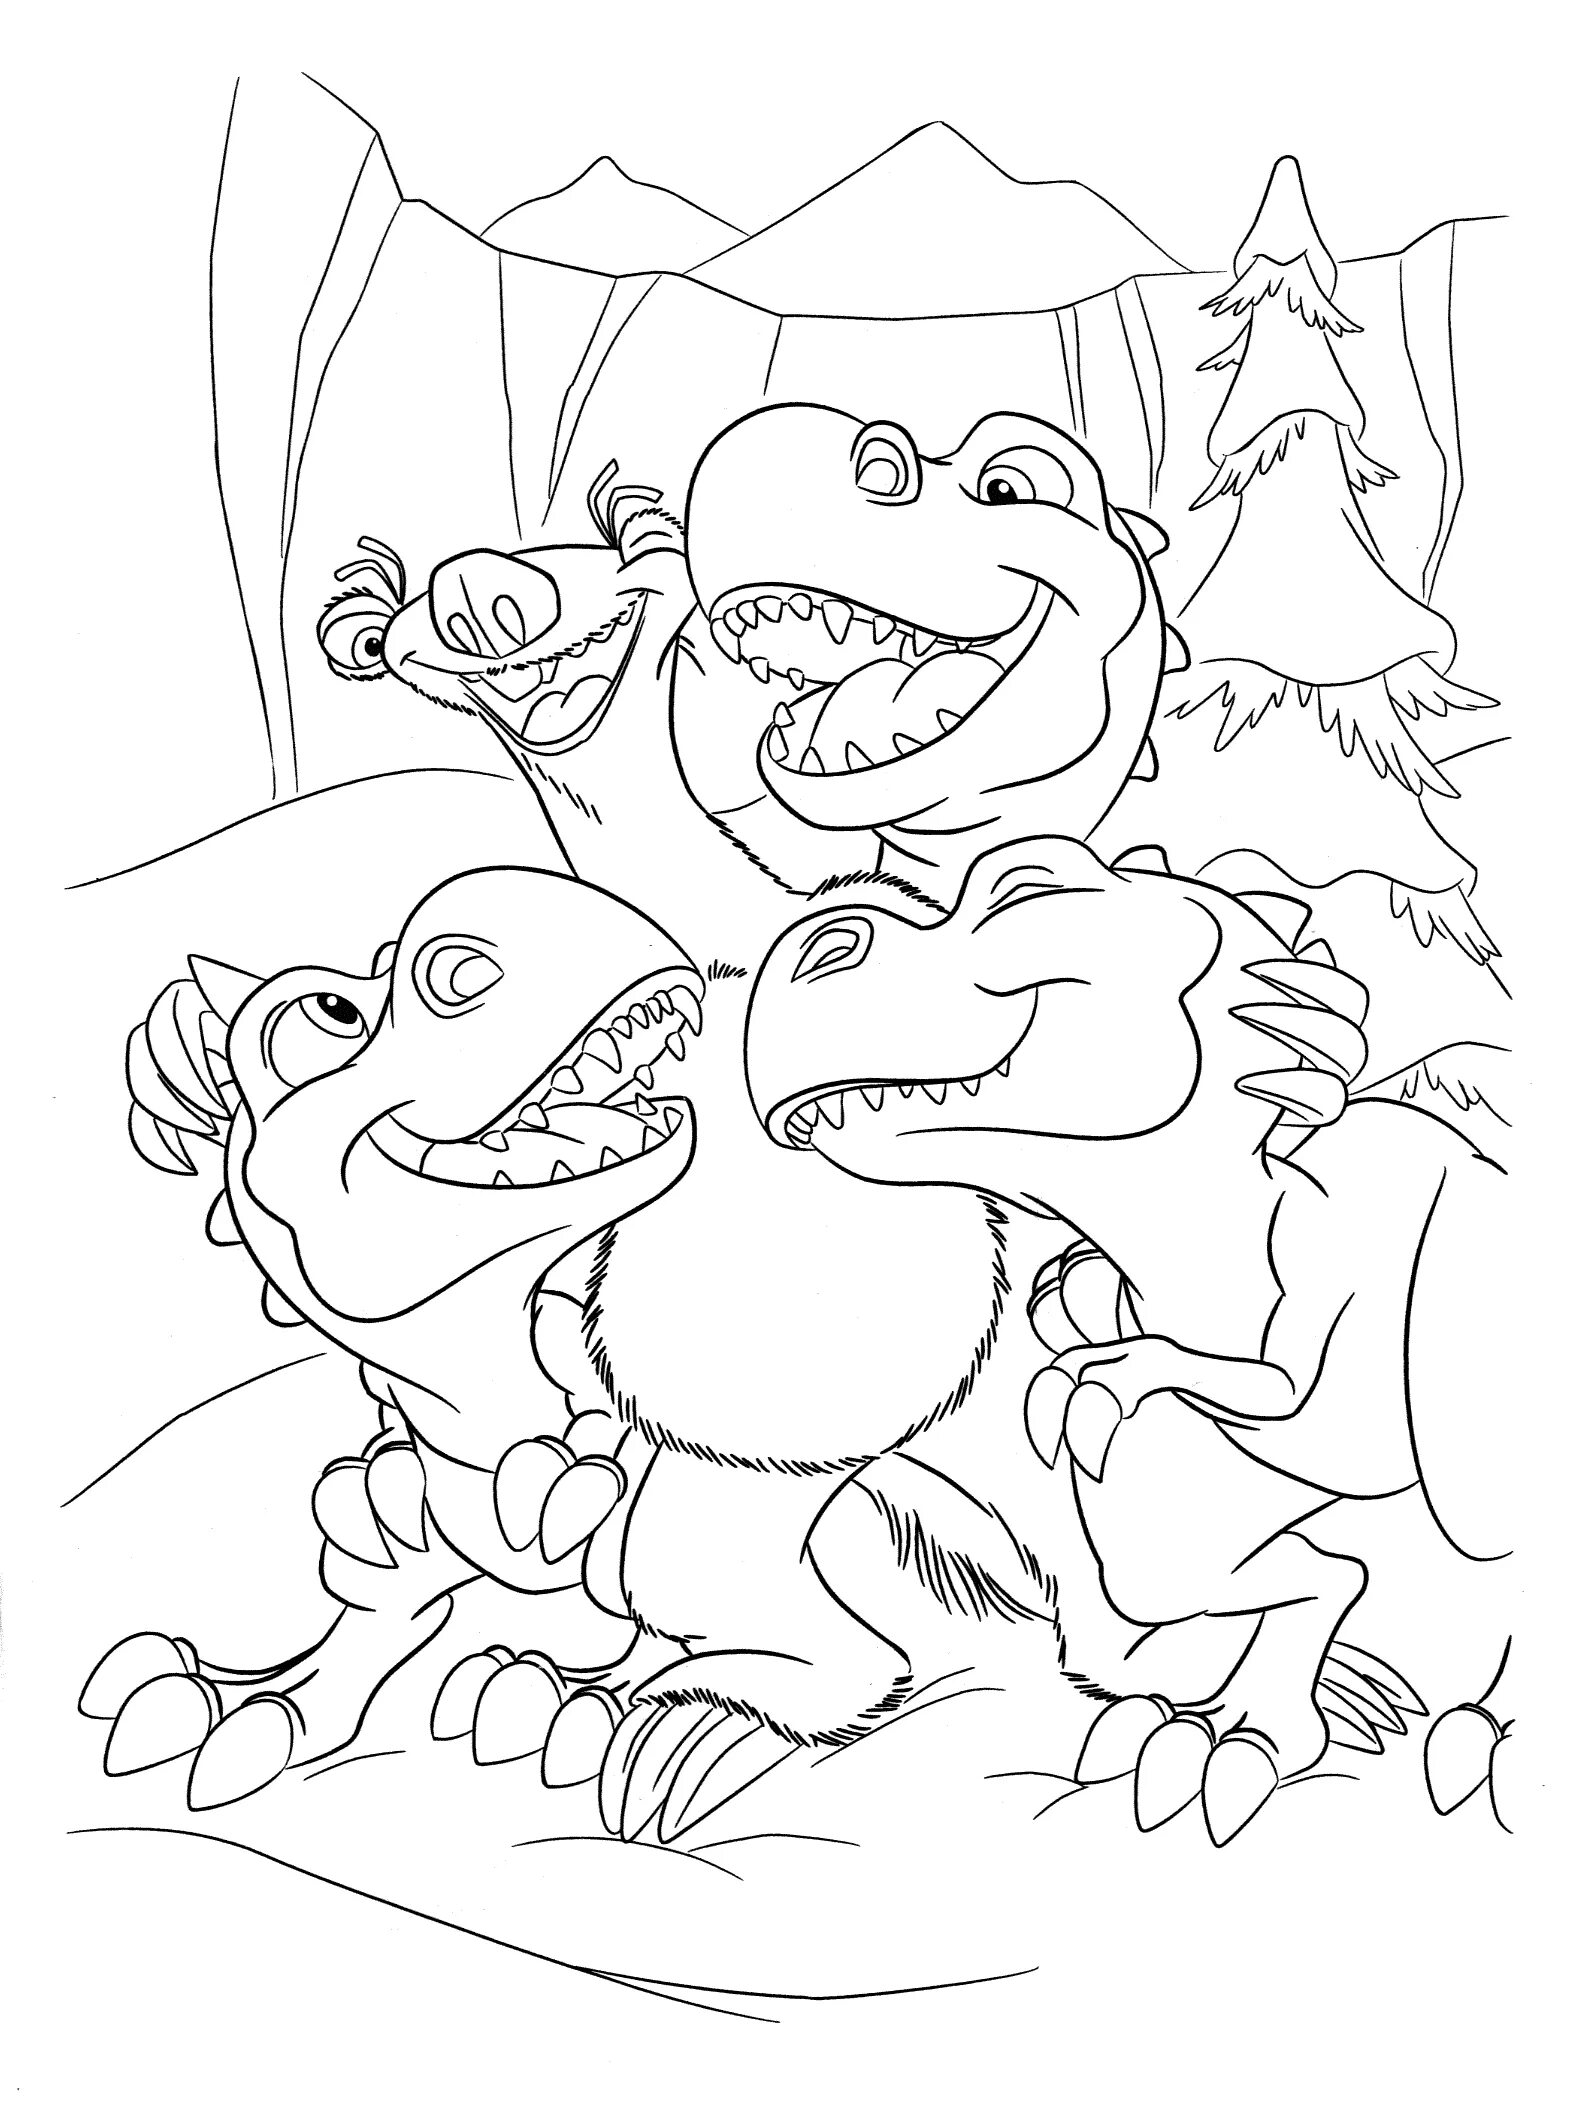 Incredible ice age dinosaur coloring book